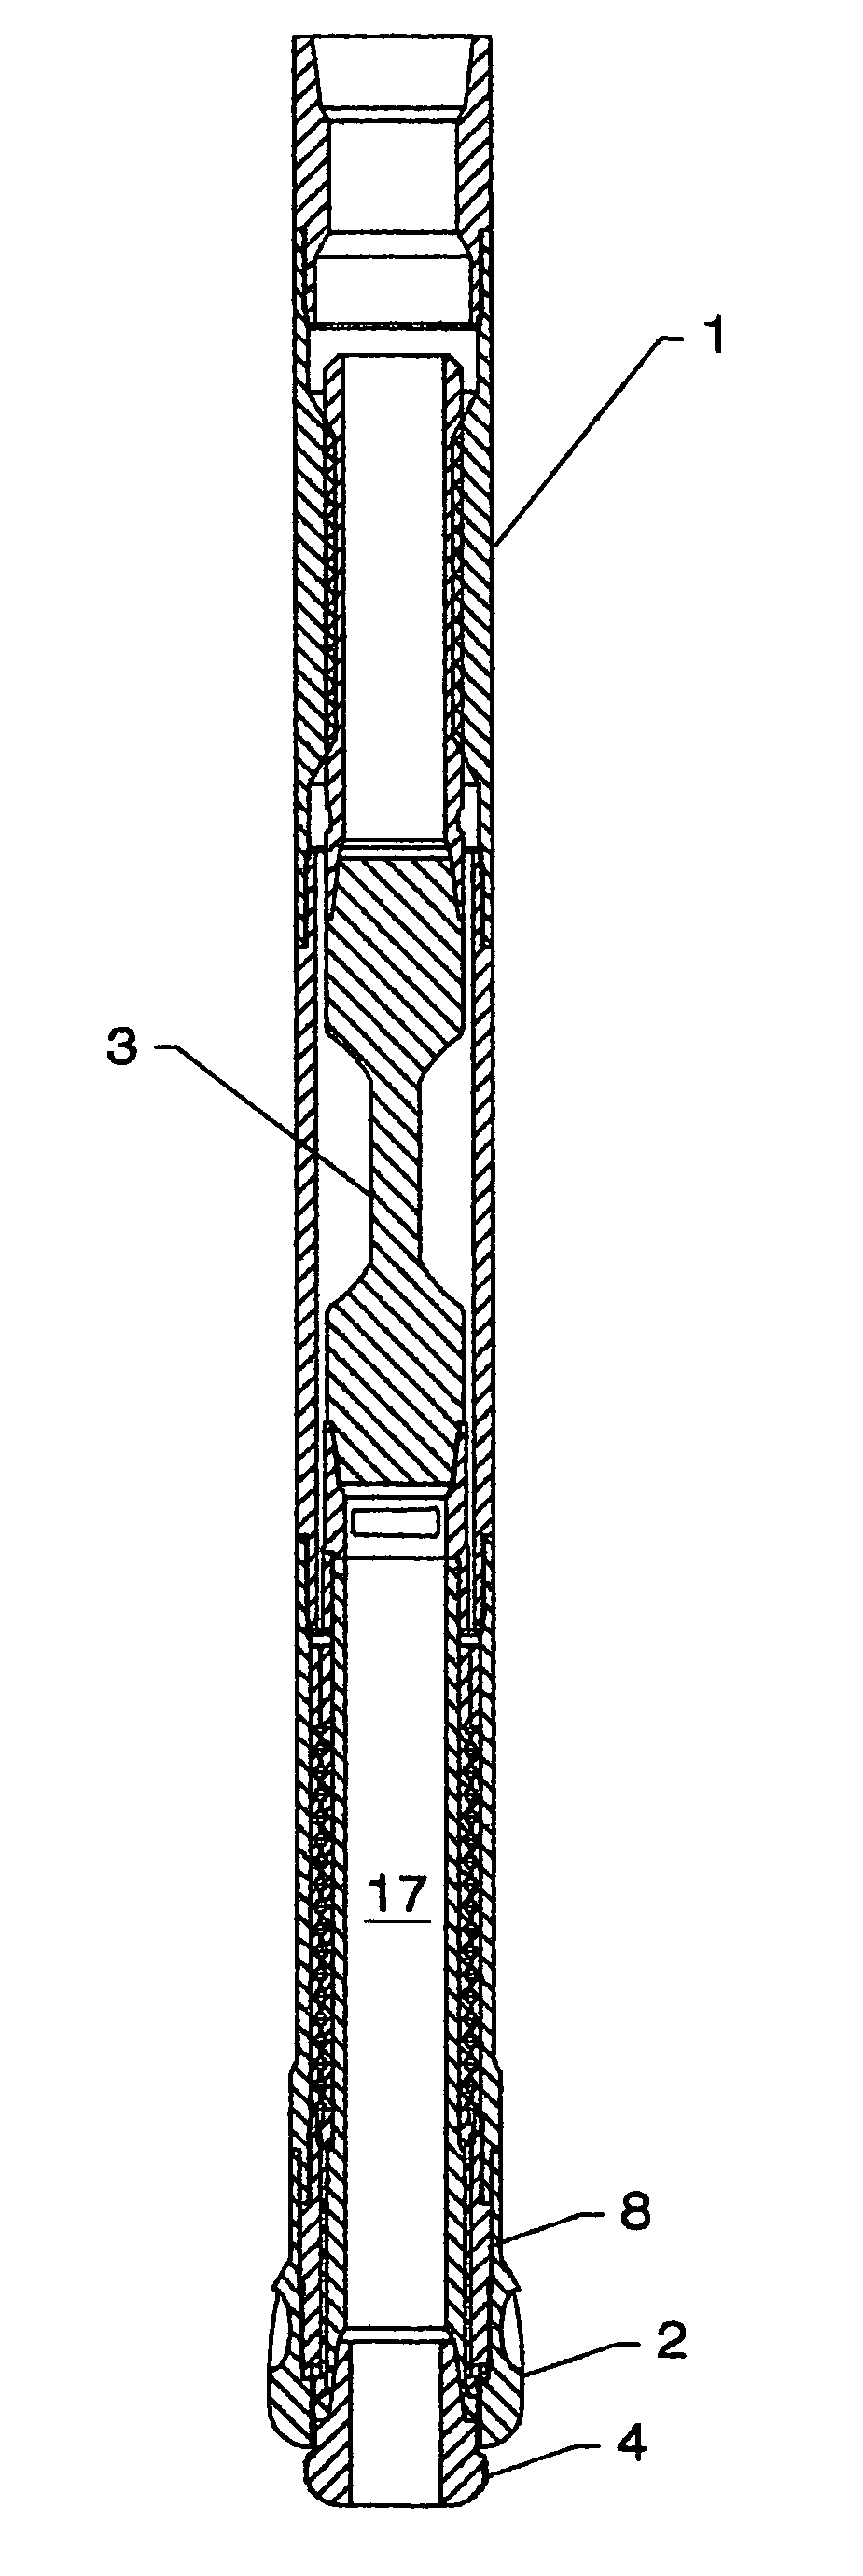 Downhole pilot bit and reamer with maximized mud motor dimensions